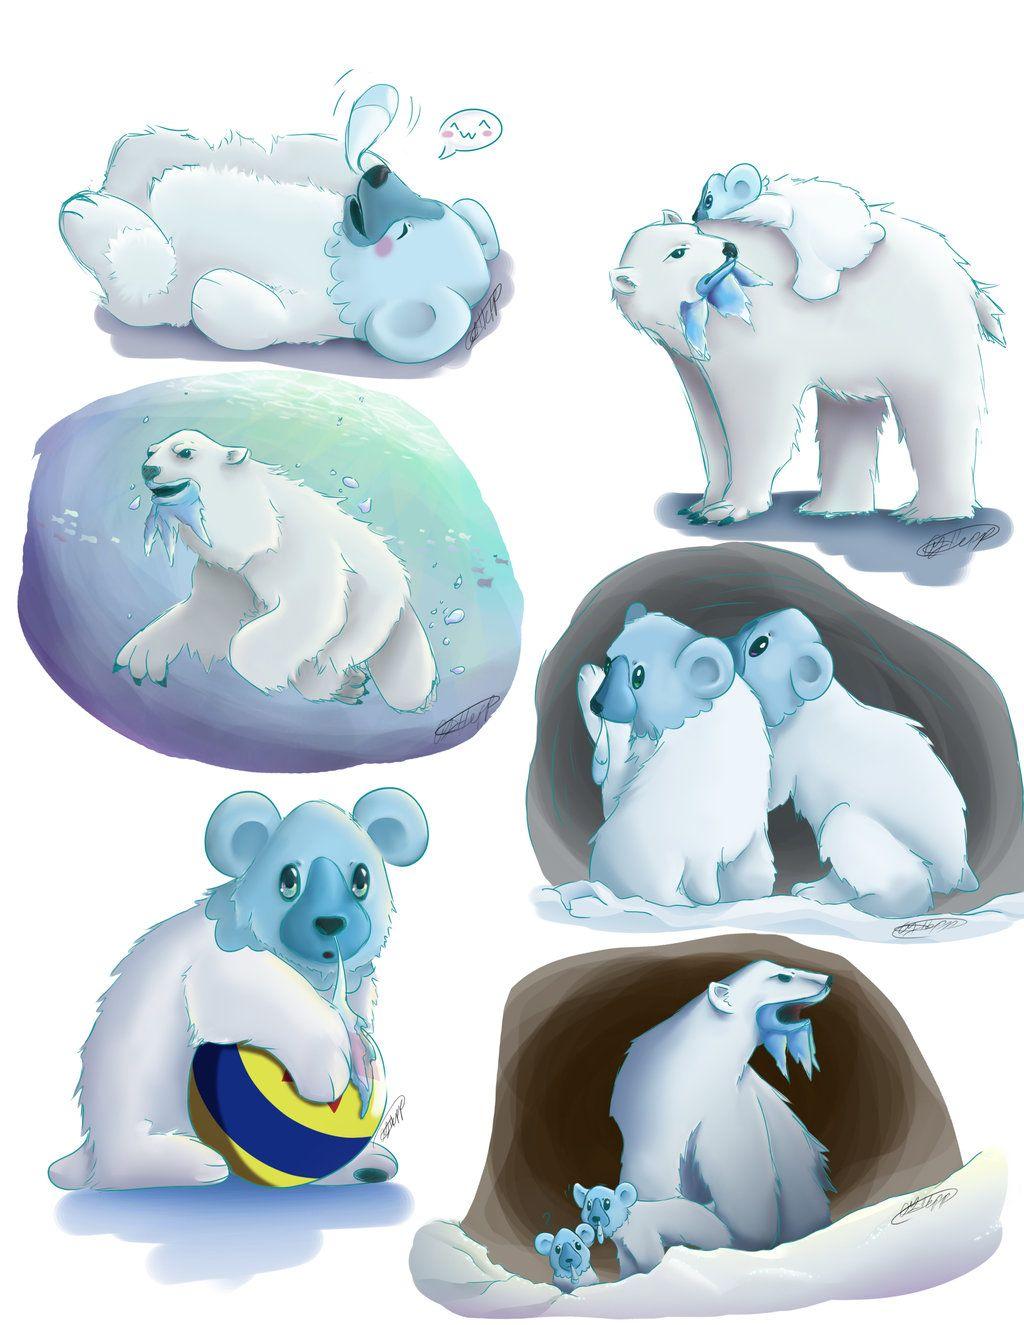 Cubchoo Beartic Sketches by silberArt